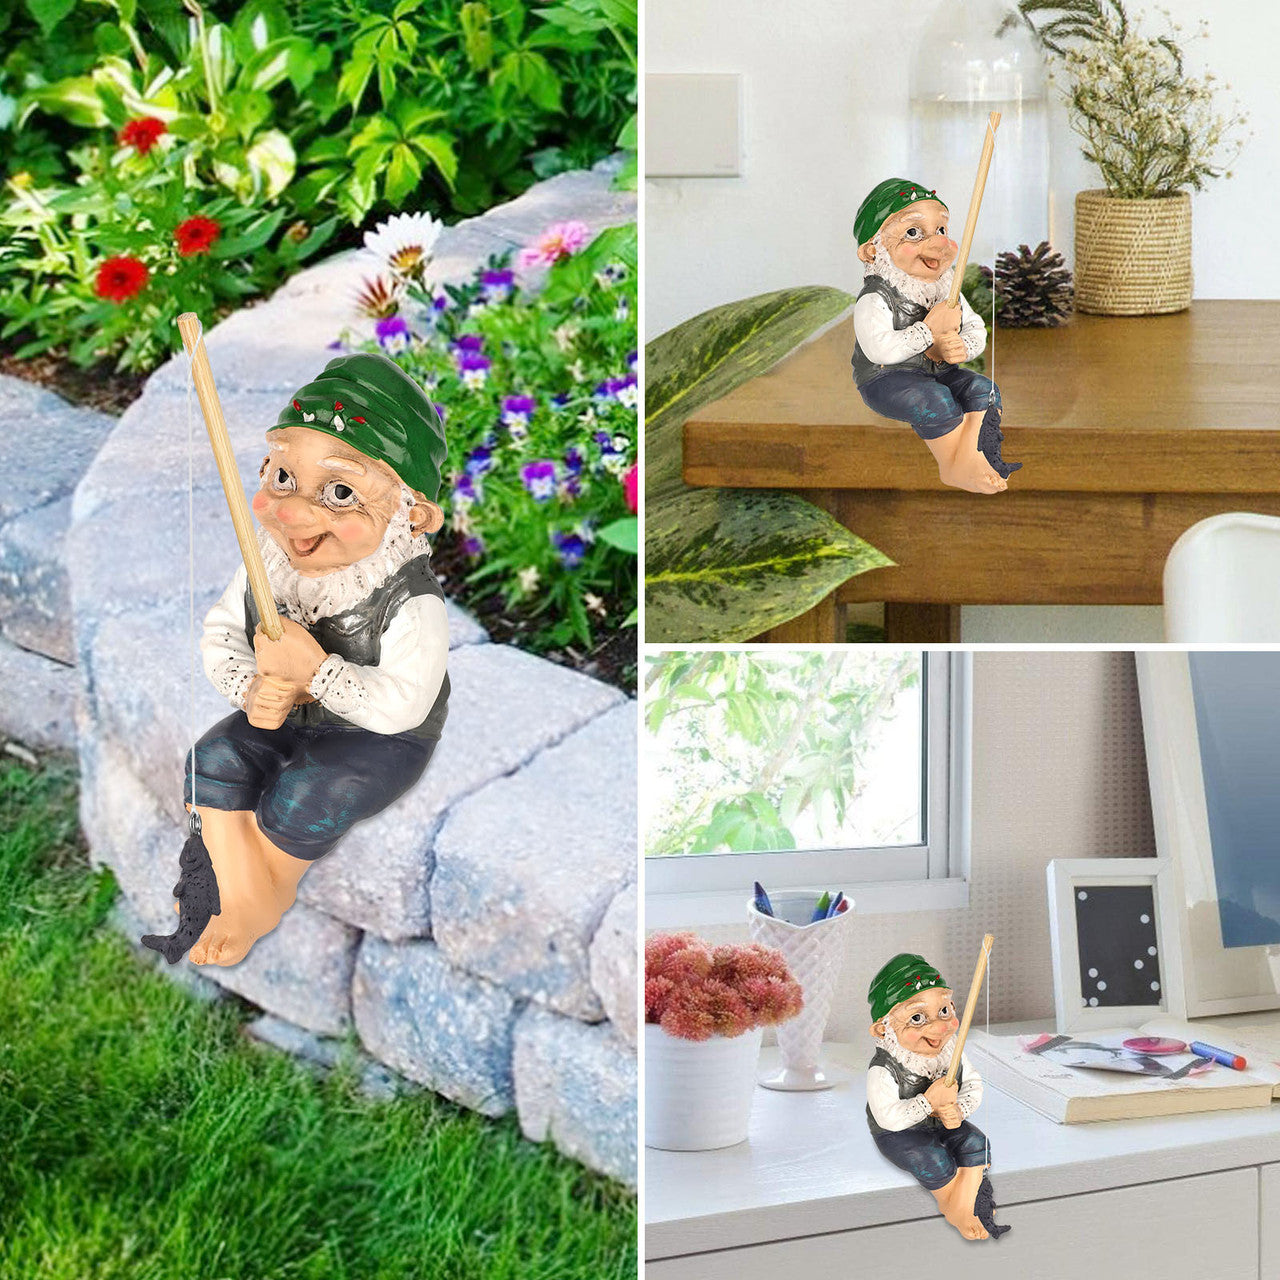 Gone Fishing Gnomes Sitter Funny Resin Figurine Lawn Garden Gnome Statues Home Outdoor Decoration